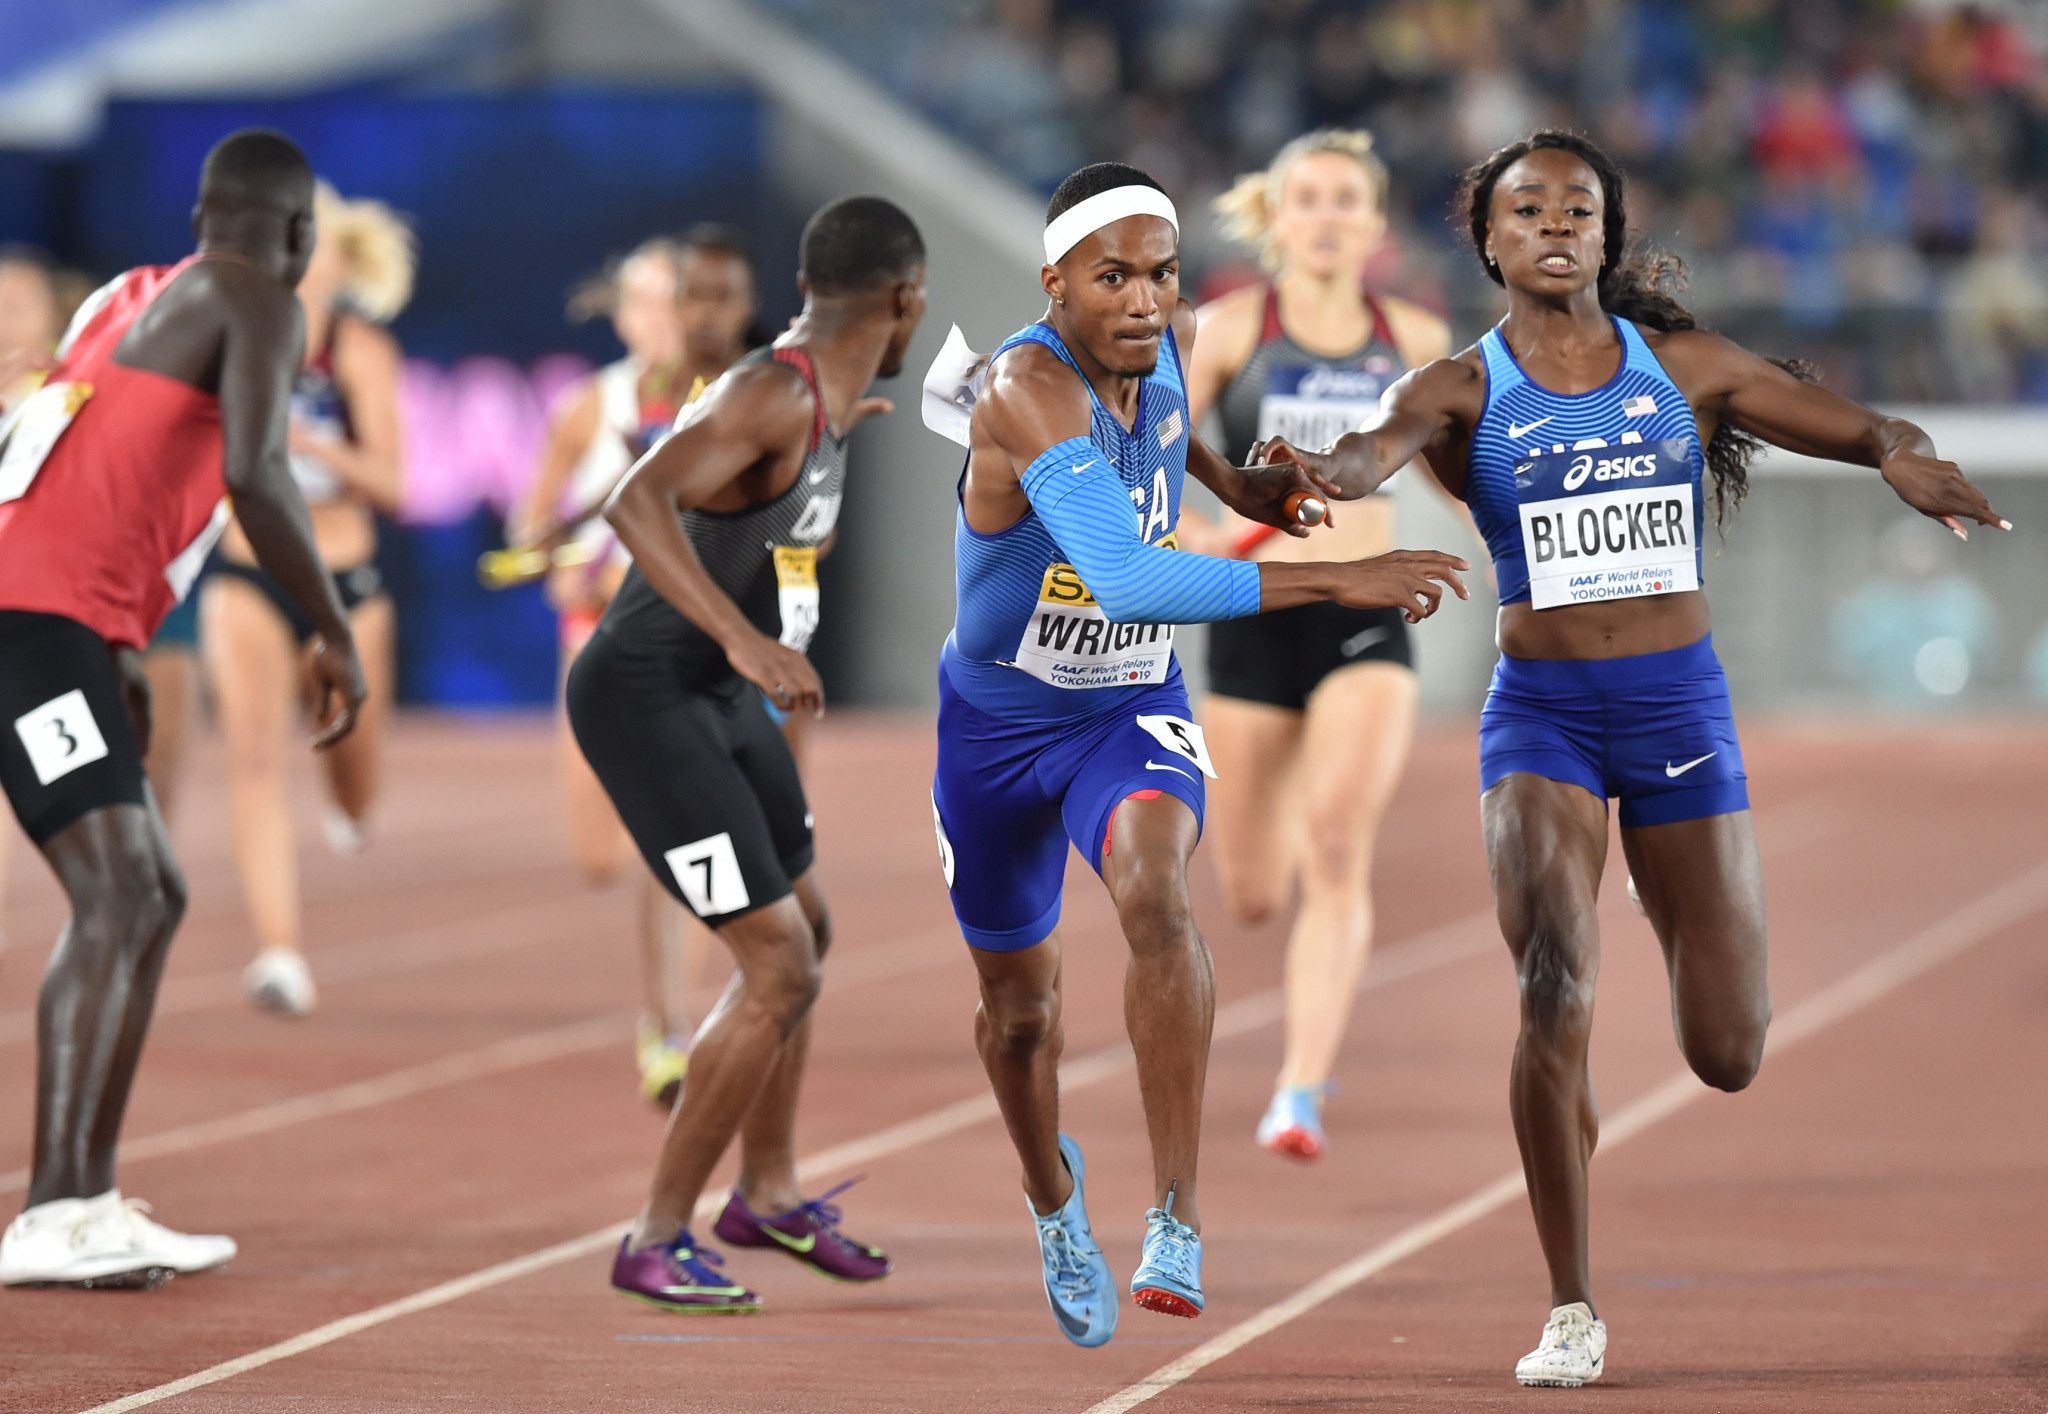 Dontavius Wright and Jasmine Blocker of the United States played their part in a victory in the mixed 4x400 metres relay final at the IAAF World Relays in Yokohama ©Getty Images